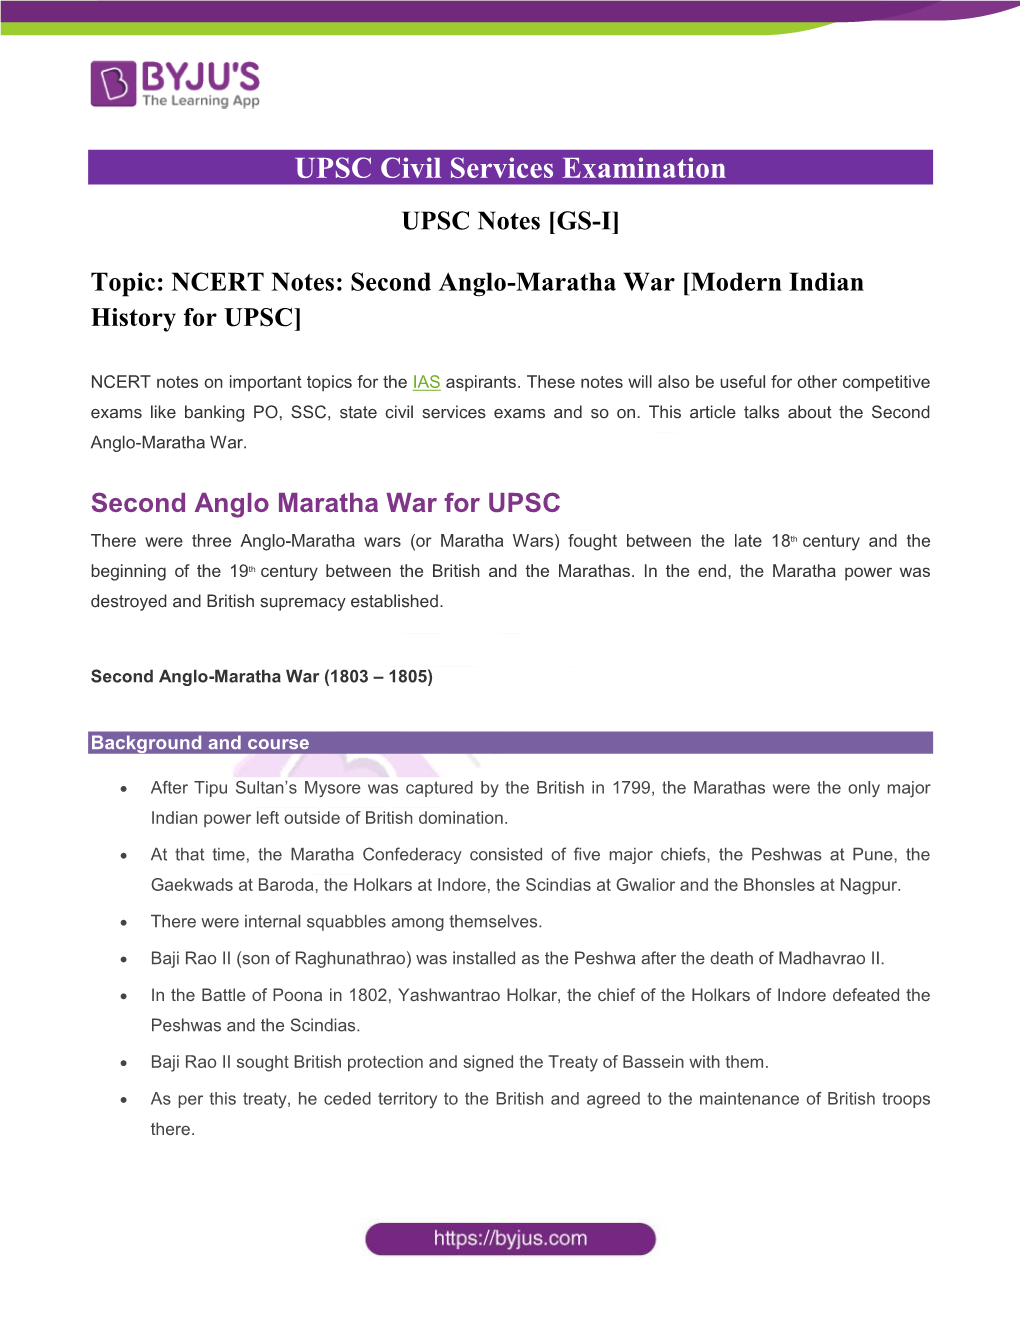 Second Anglo-Maratha War [Modern Indian History for UPSC]